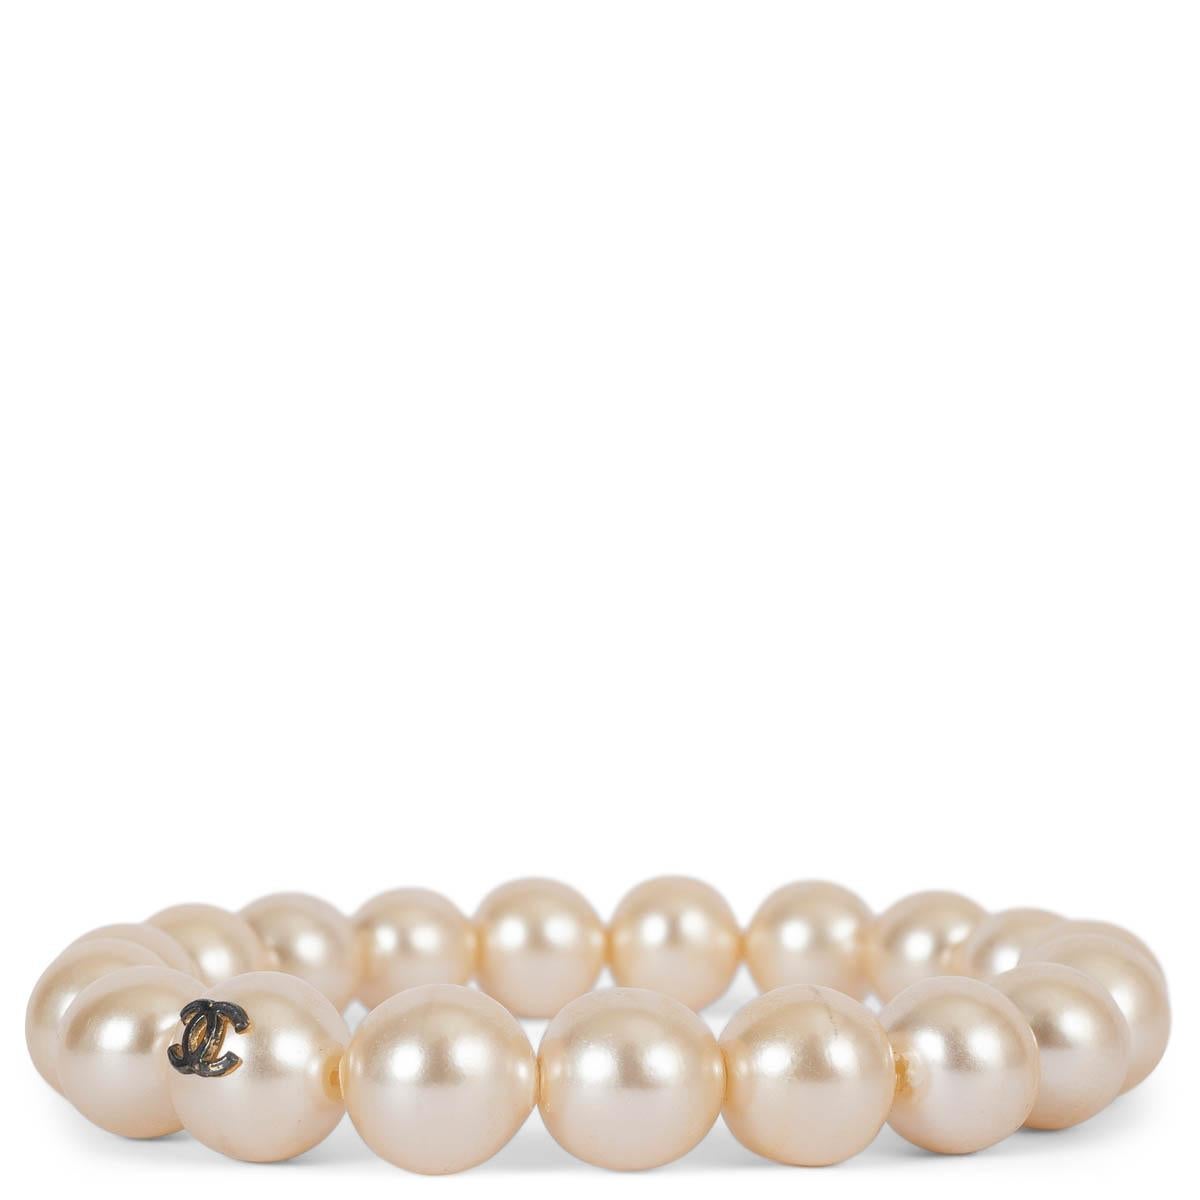 100% authentic Chanel faux pearl elastic bracelet with gunmetal CC on one pearl. Has been worn and is in excellent condition. 

Measurements
Circumference	19.2 (fits large and is elastic)

All our listings include only the listed item unless